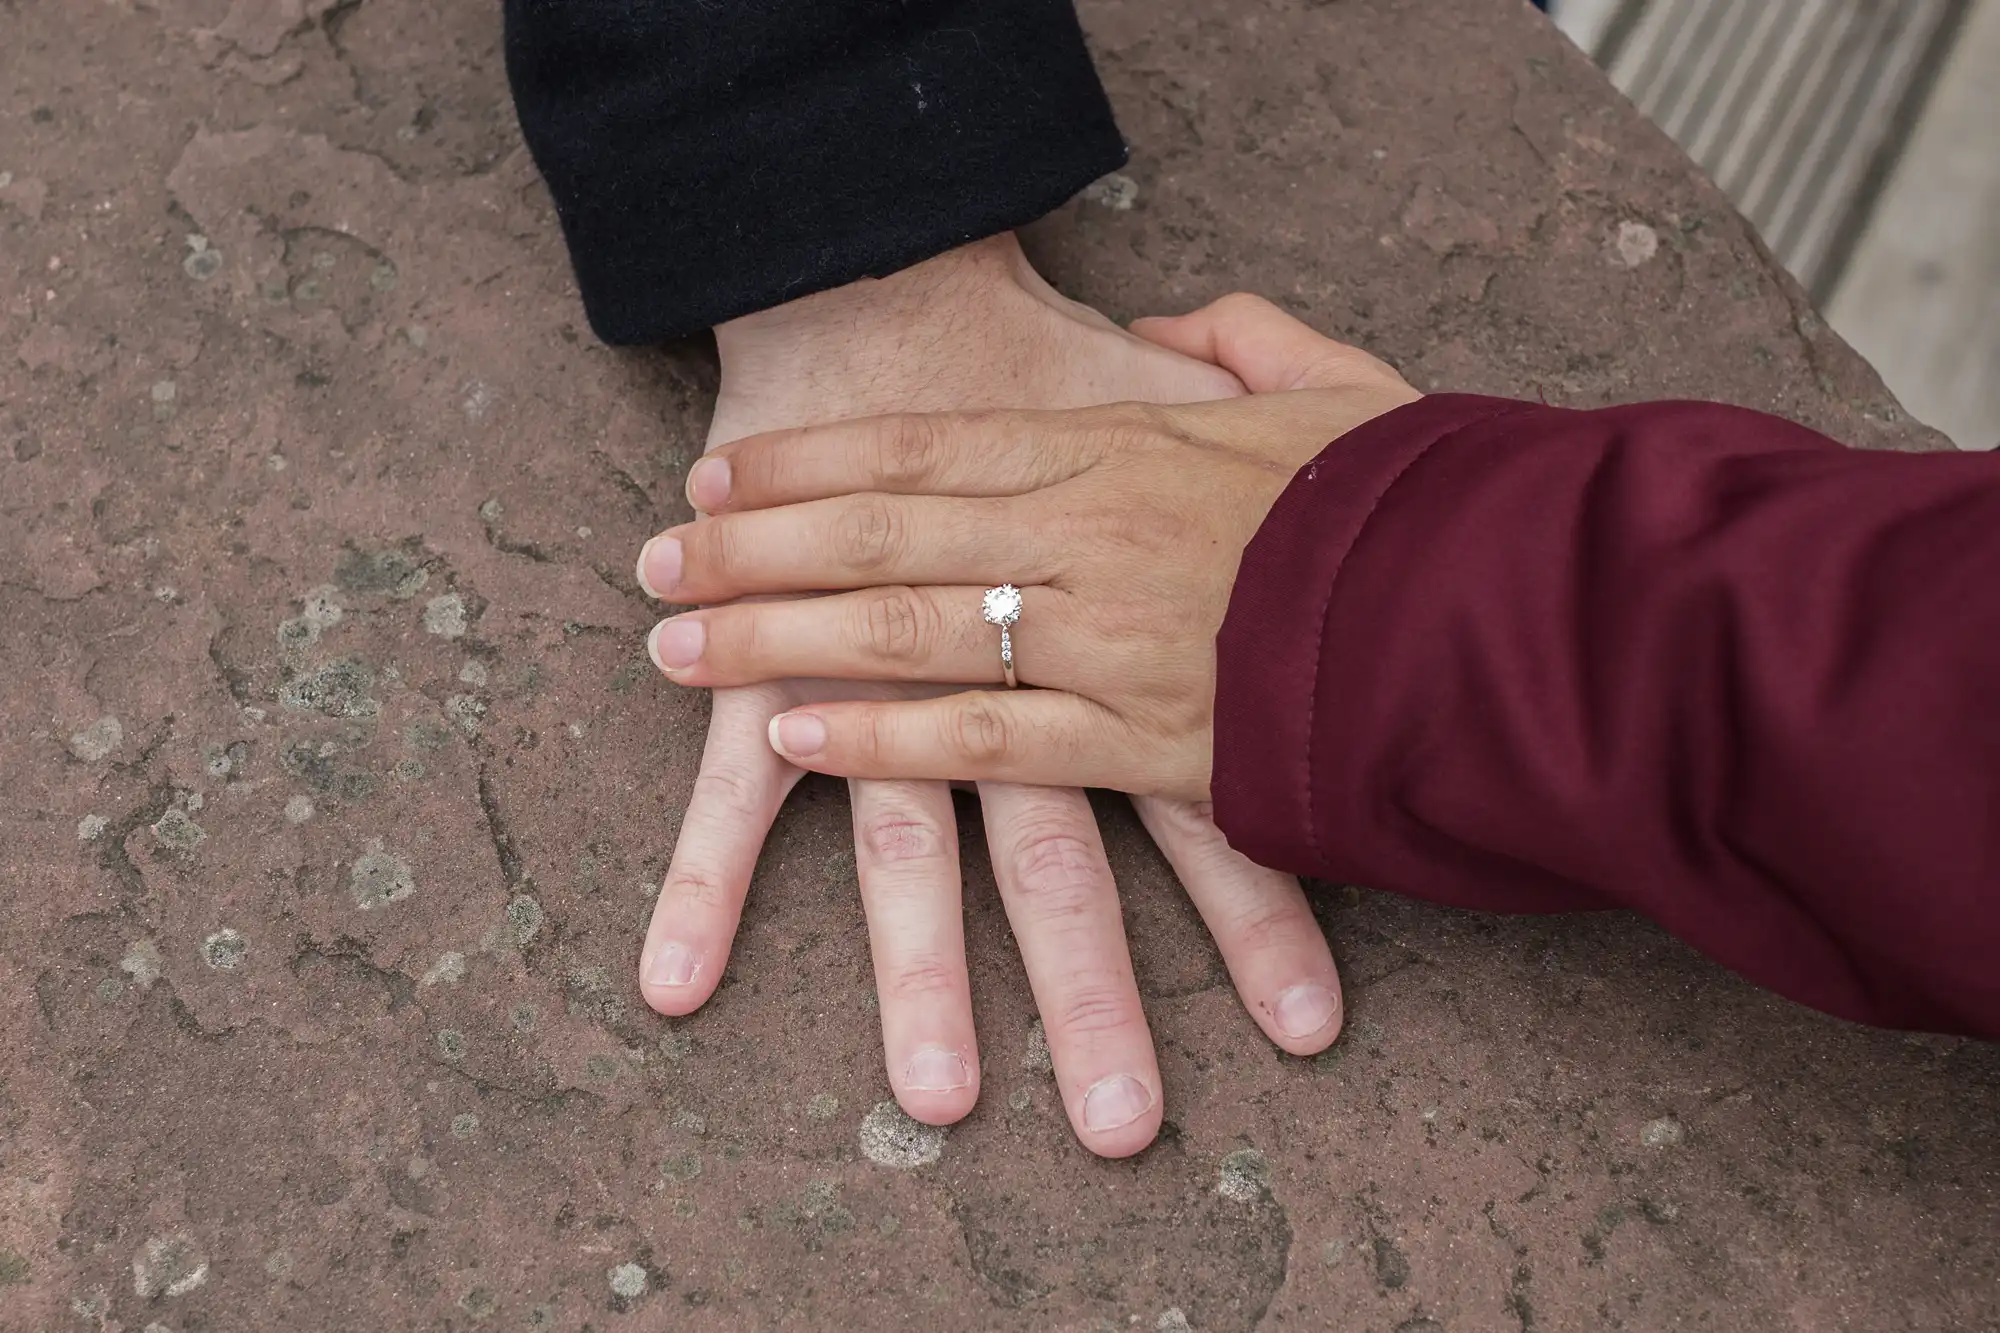 A close-up view of a woman's hand on top of a man's hand, highlighting her engagement ring, resting on a stone surface.